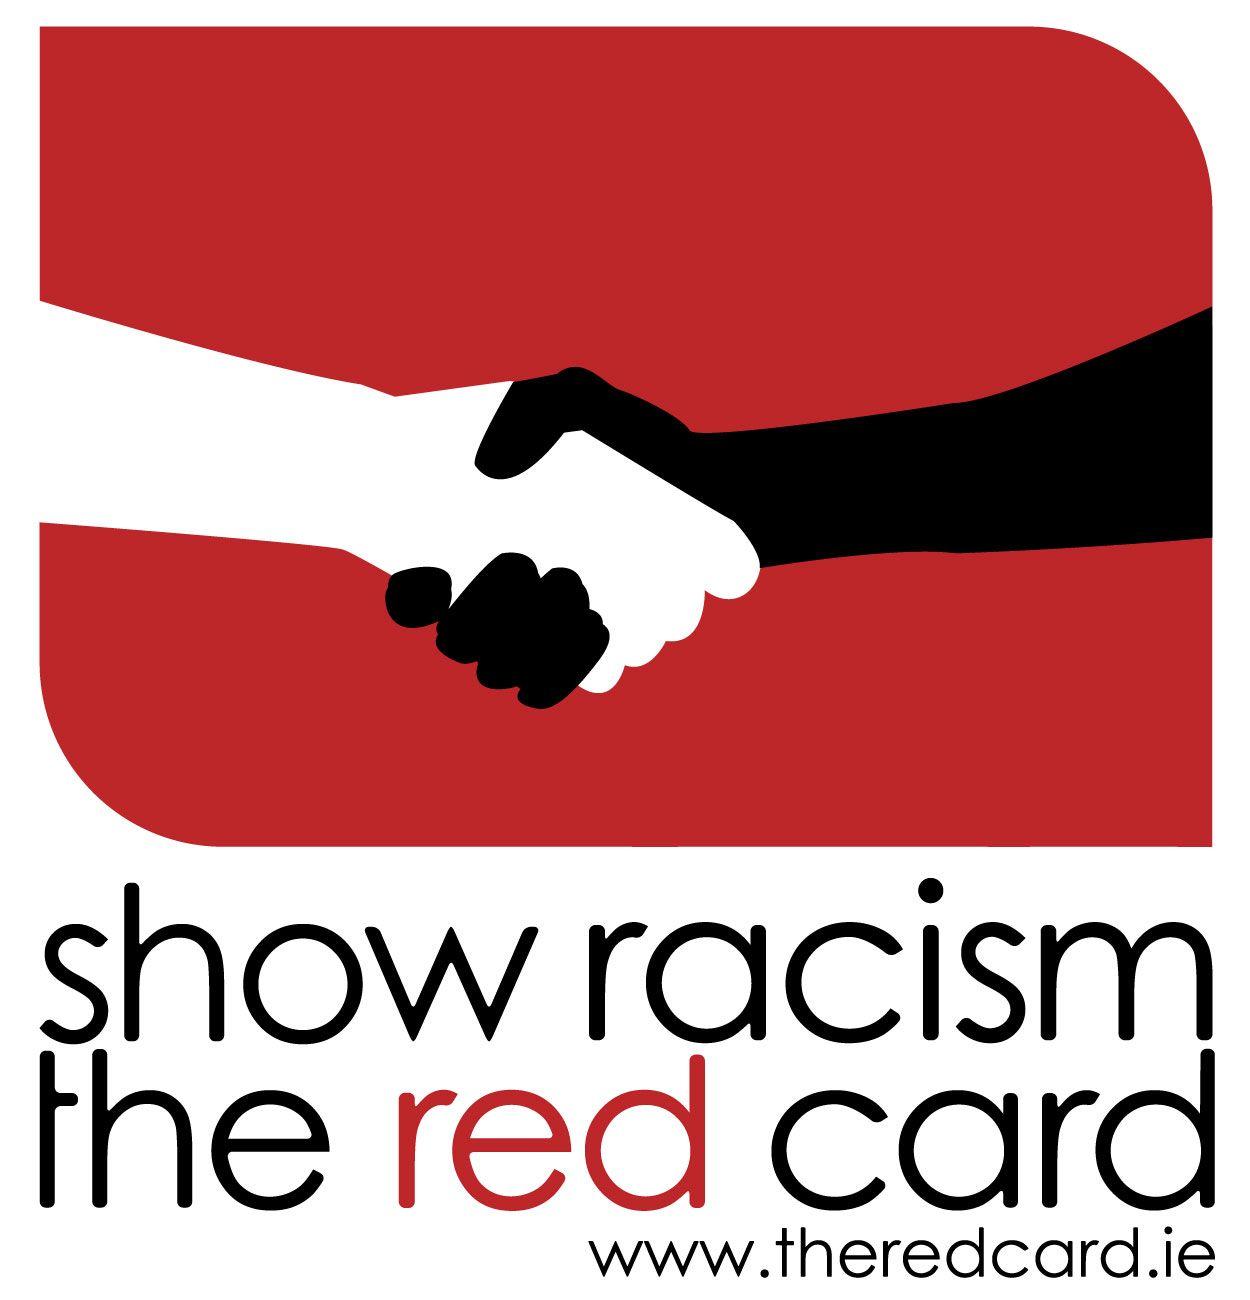 Racism Logo - Downloads. Show Racism The Red Card